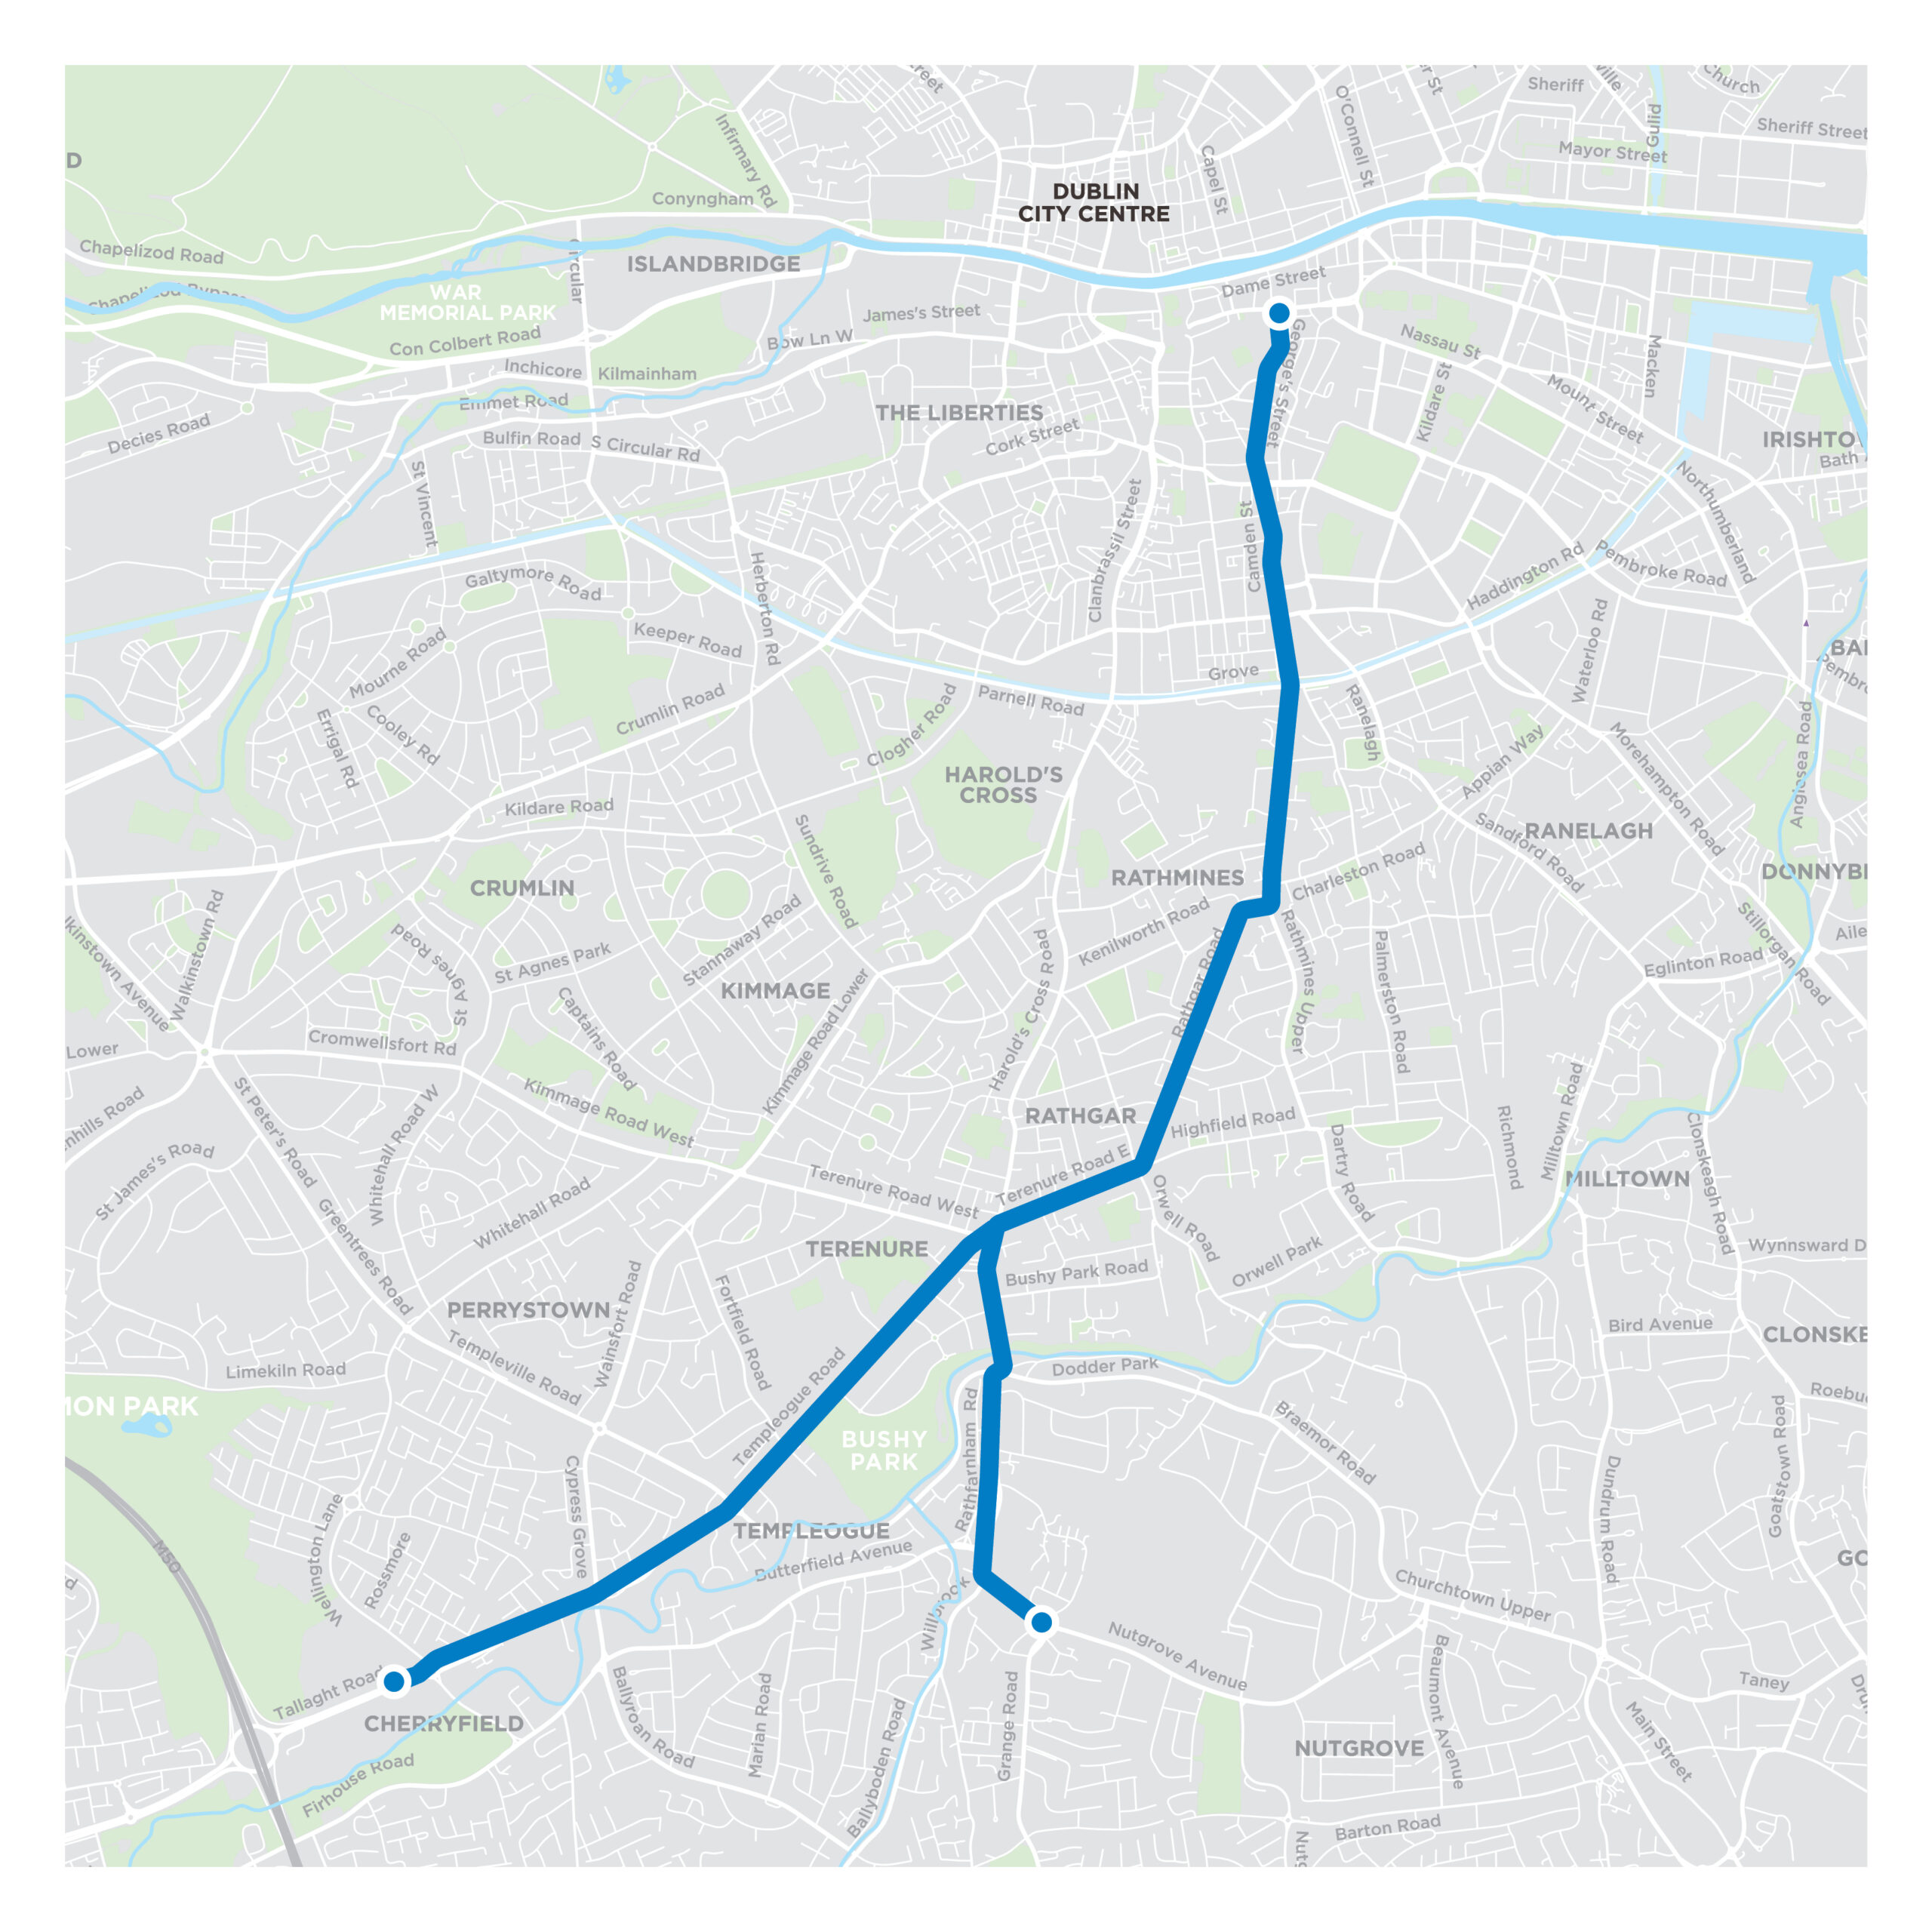 The image shows a map of Dublin, highlighting the route of the proposed Templeogue/Rathfarnham to City Centre bus corridor.